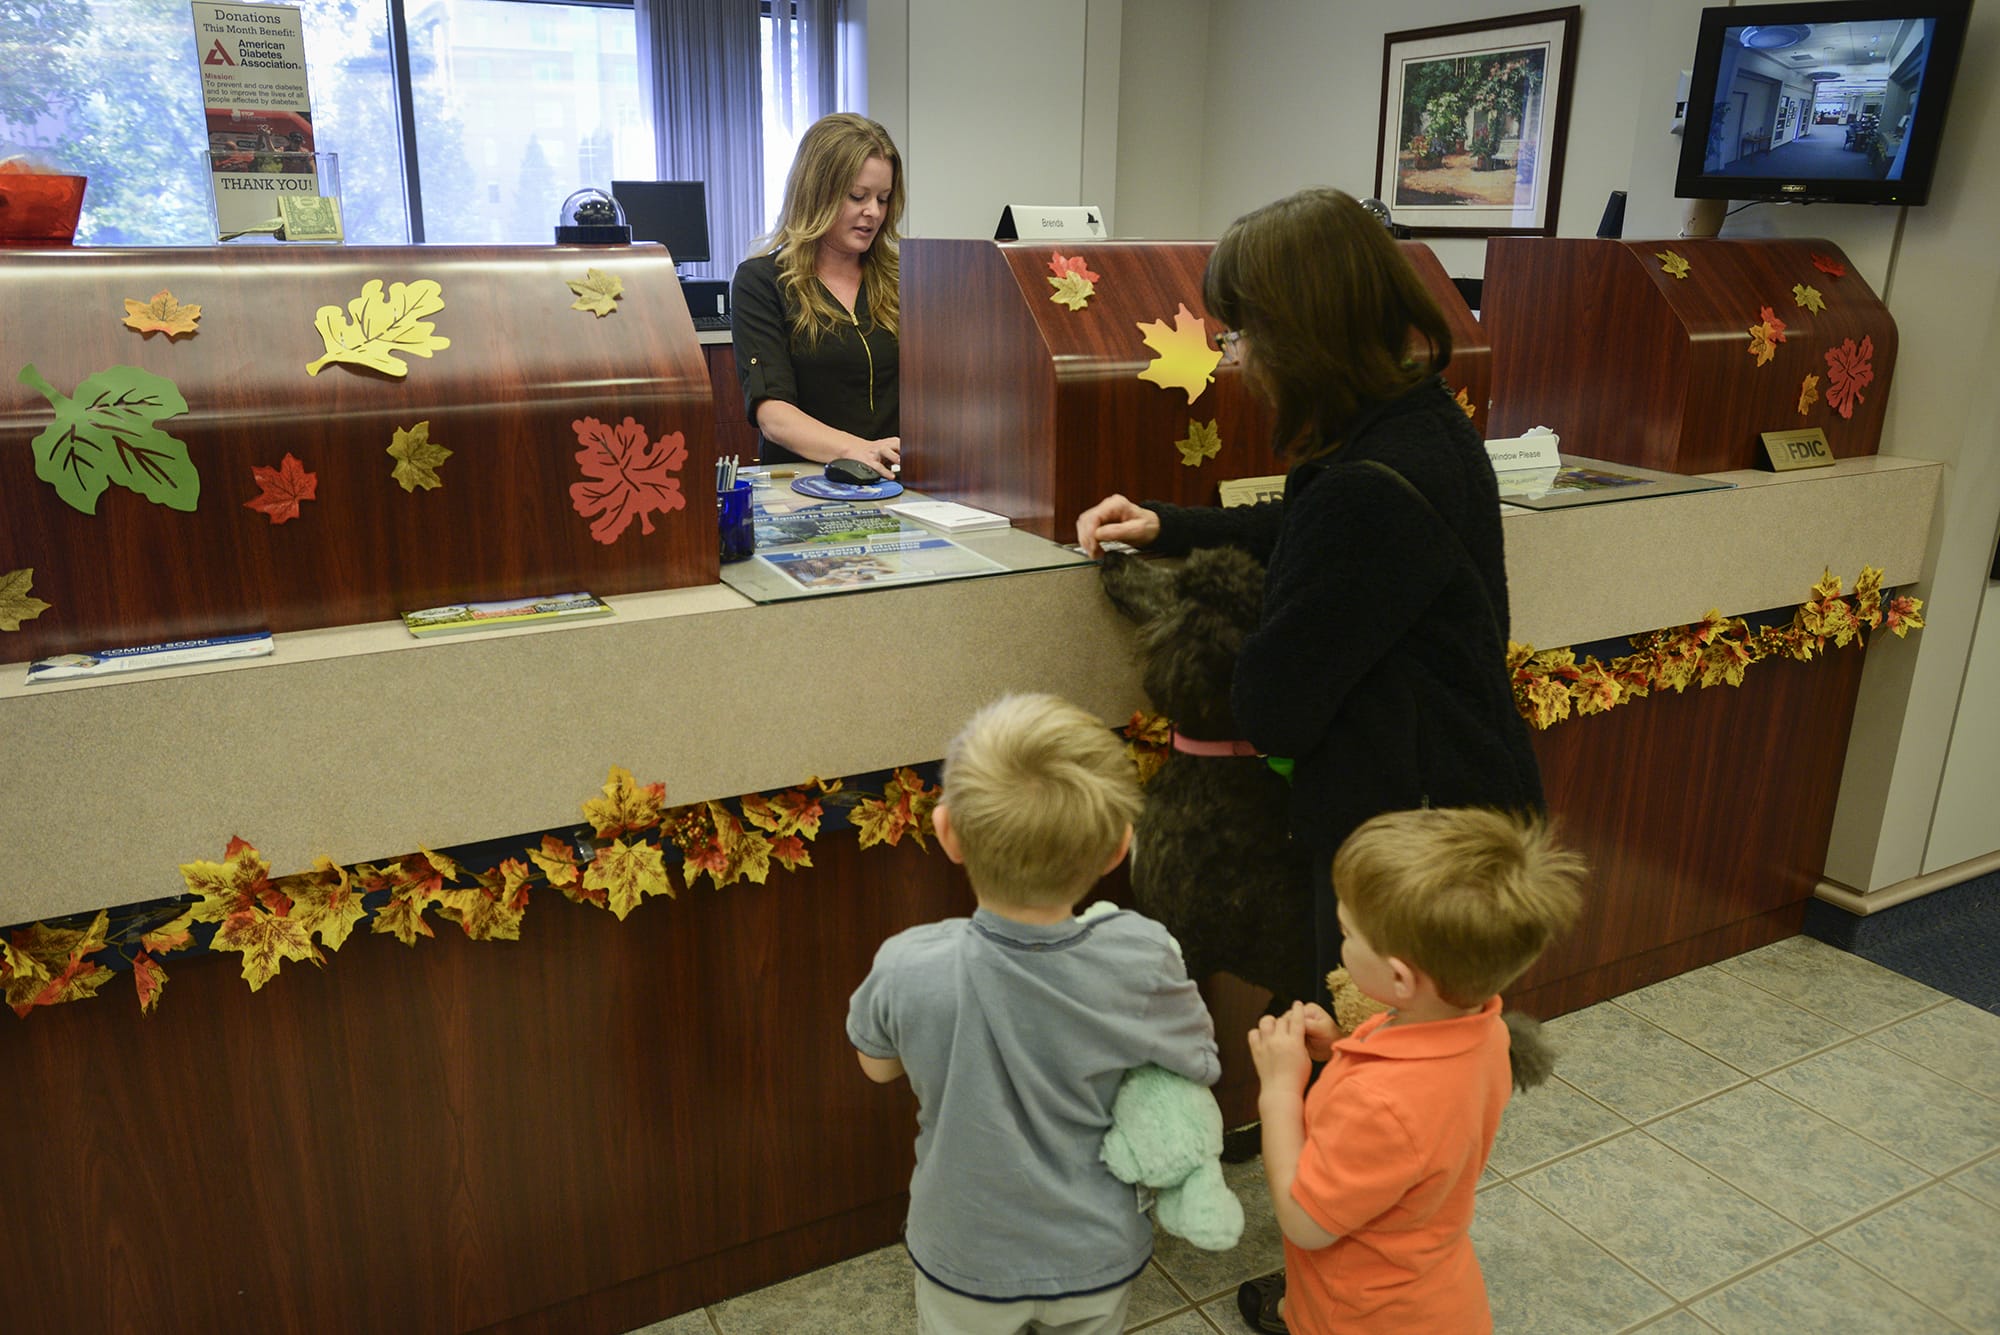 Riverview Community Bank teller Brenda Wilson helps customers at the downtown Vancouver Riverview location Thursday.